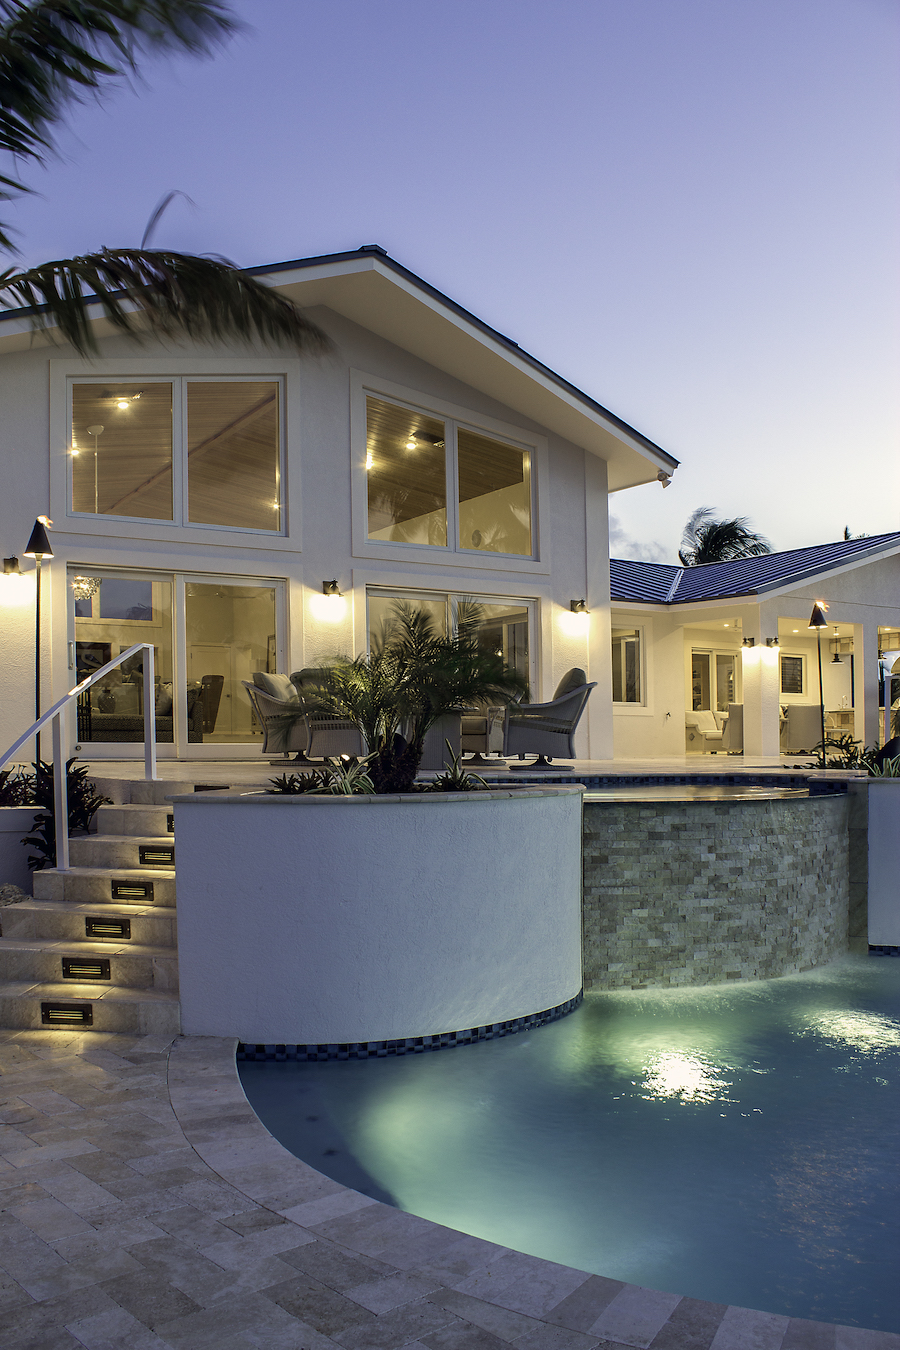 Why Your Home Needs Outdoor Lighting Control